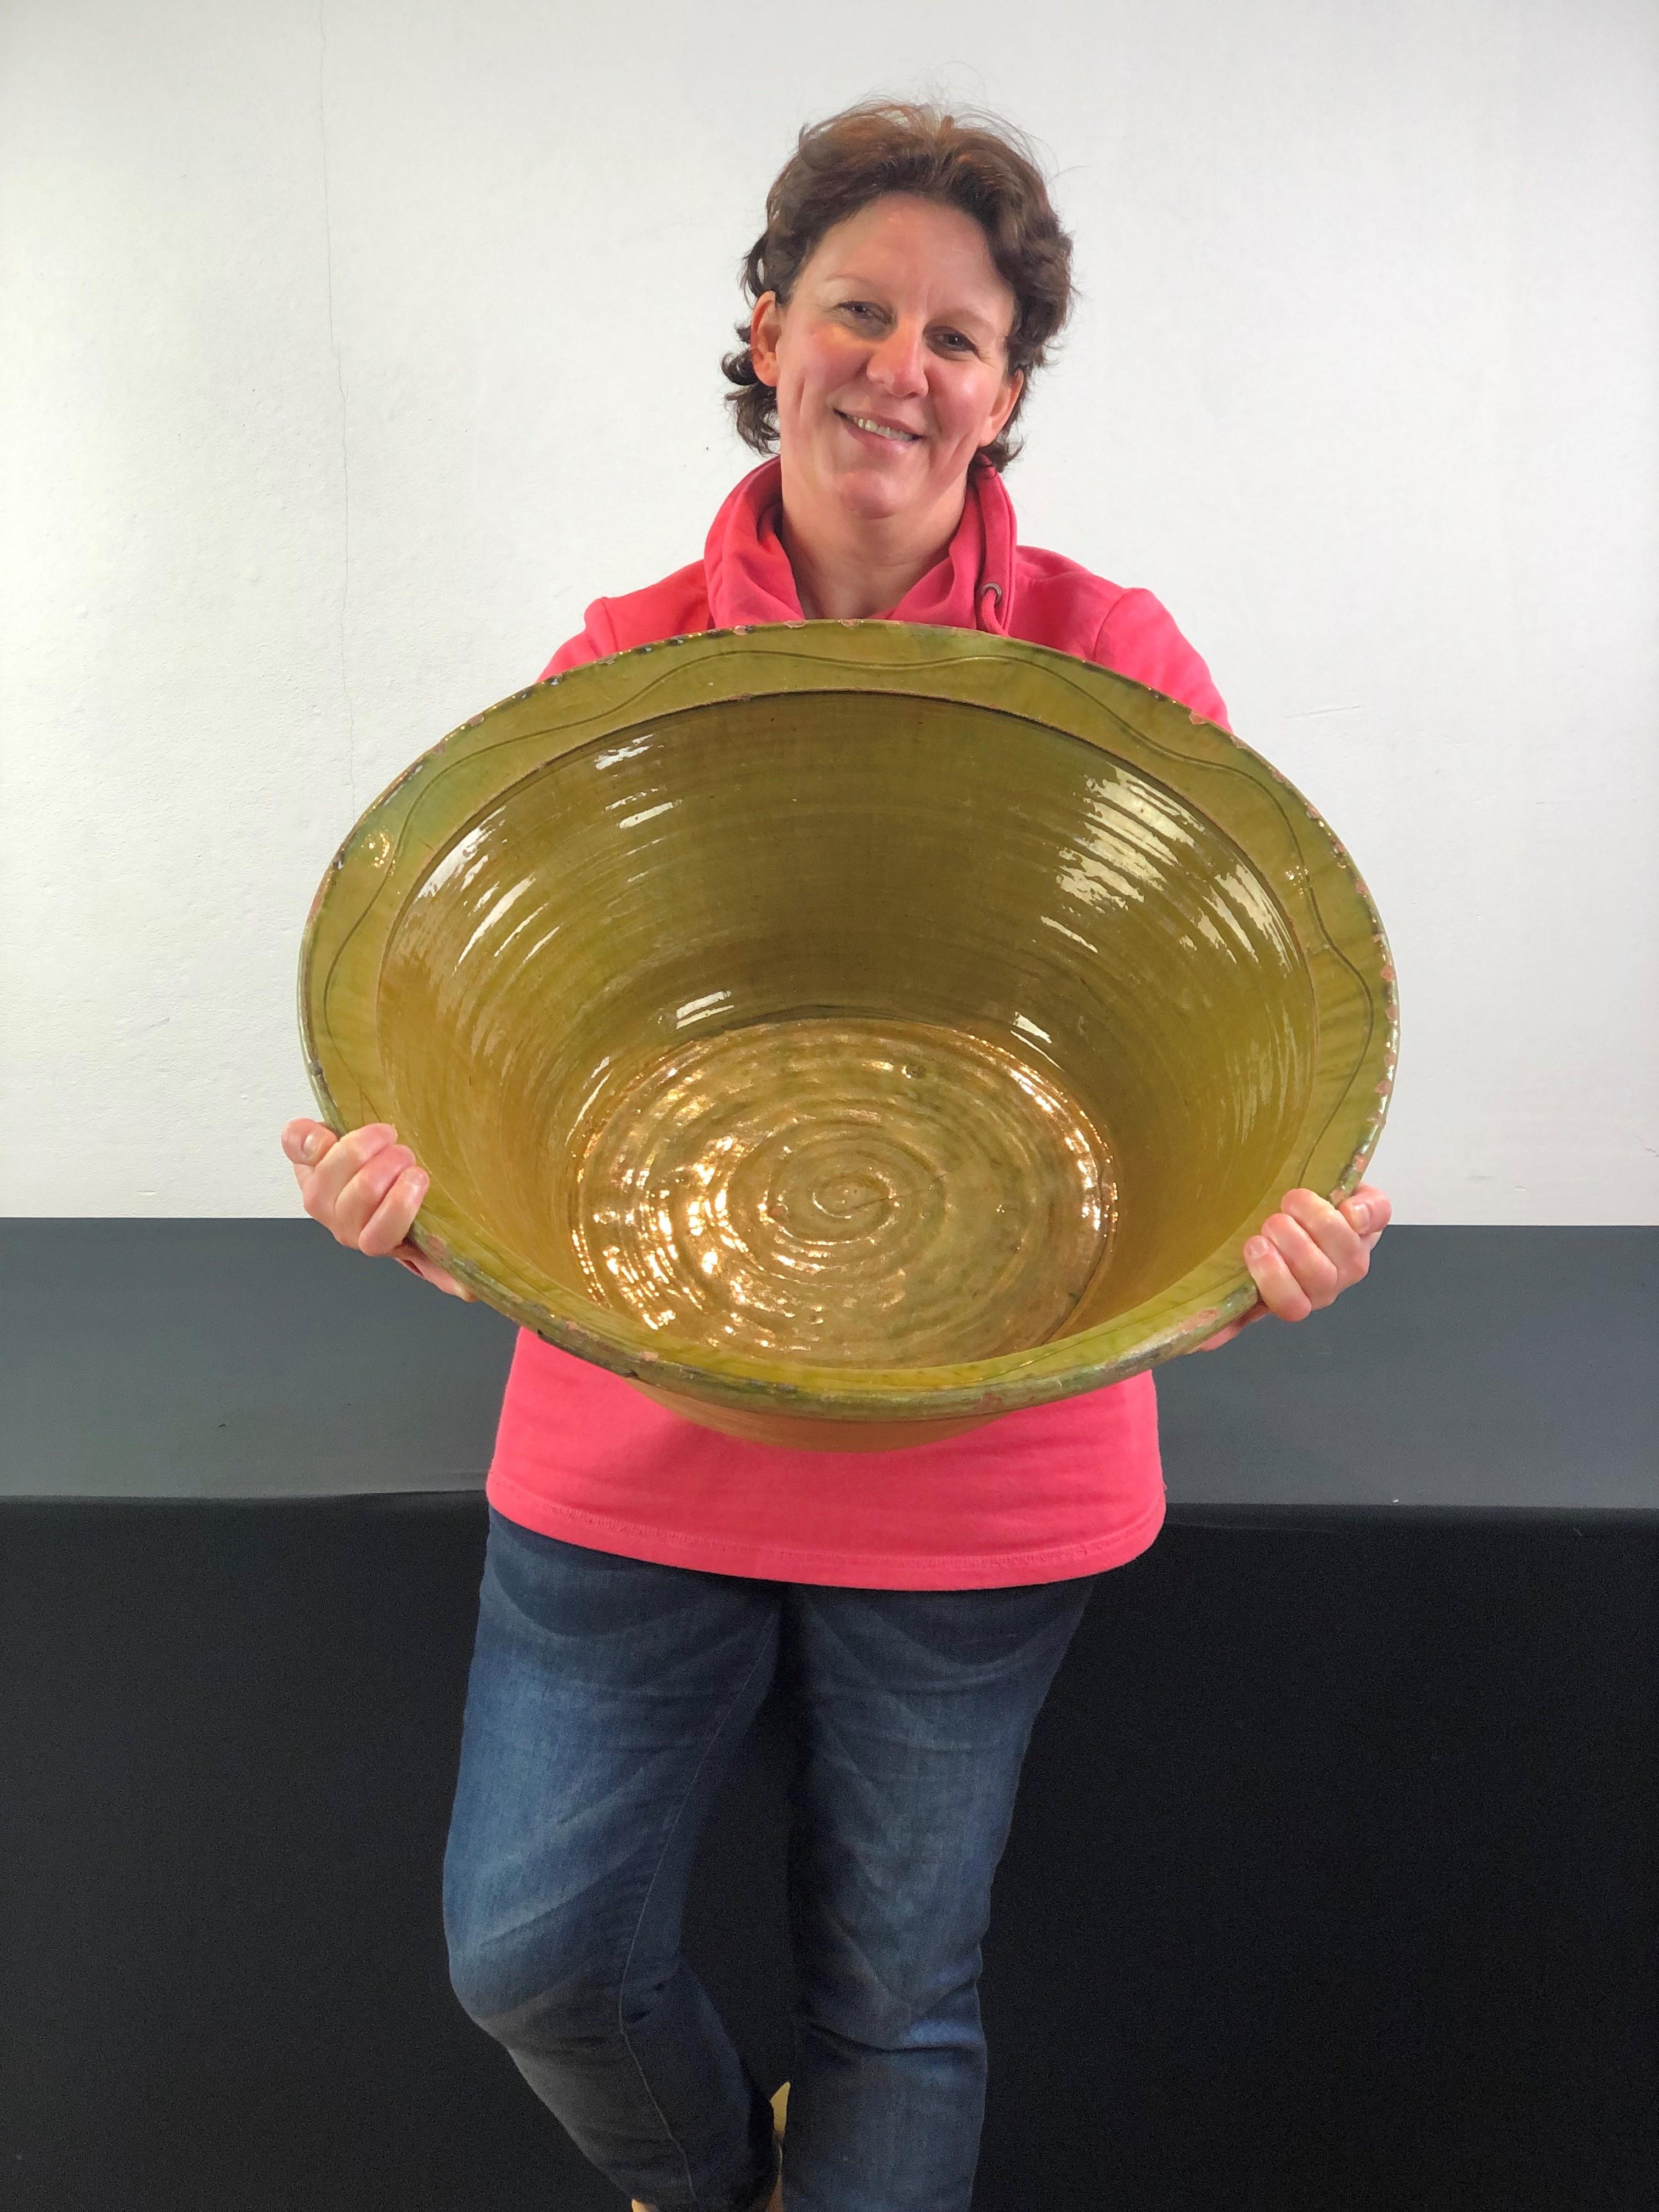 Great looking large glazed terracotta bowl. 
Awesome by his large size and by the color ! 

This old Spanish terracotta bowl was used to display olives to sell. 
It has a beautiful green color - olive green color with a touch of dark lemongreen and